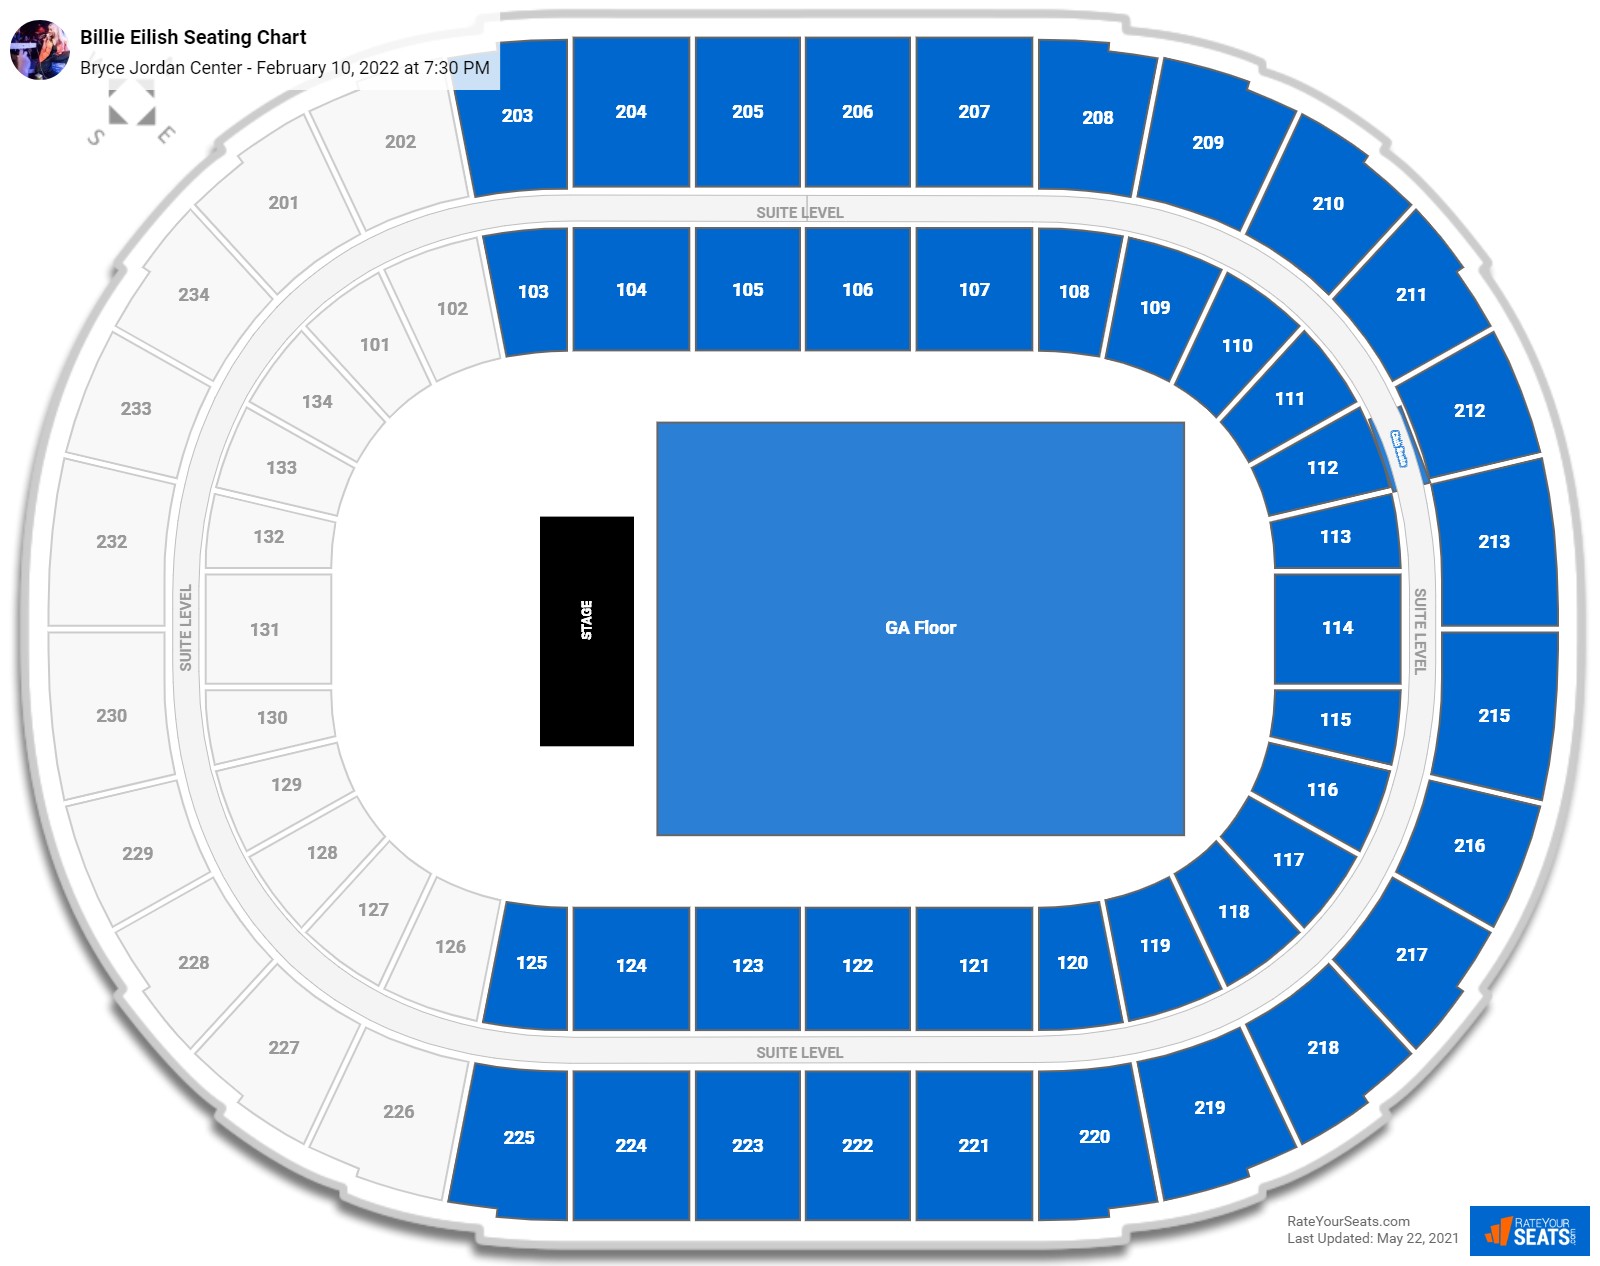 Bryce Jordan Center Seating Charts for Concerts